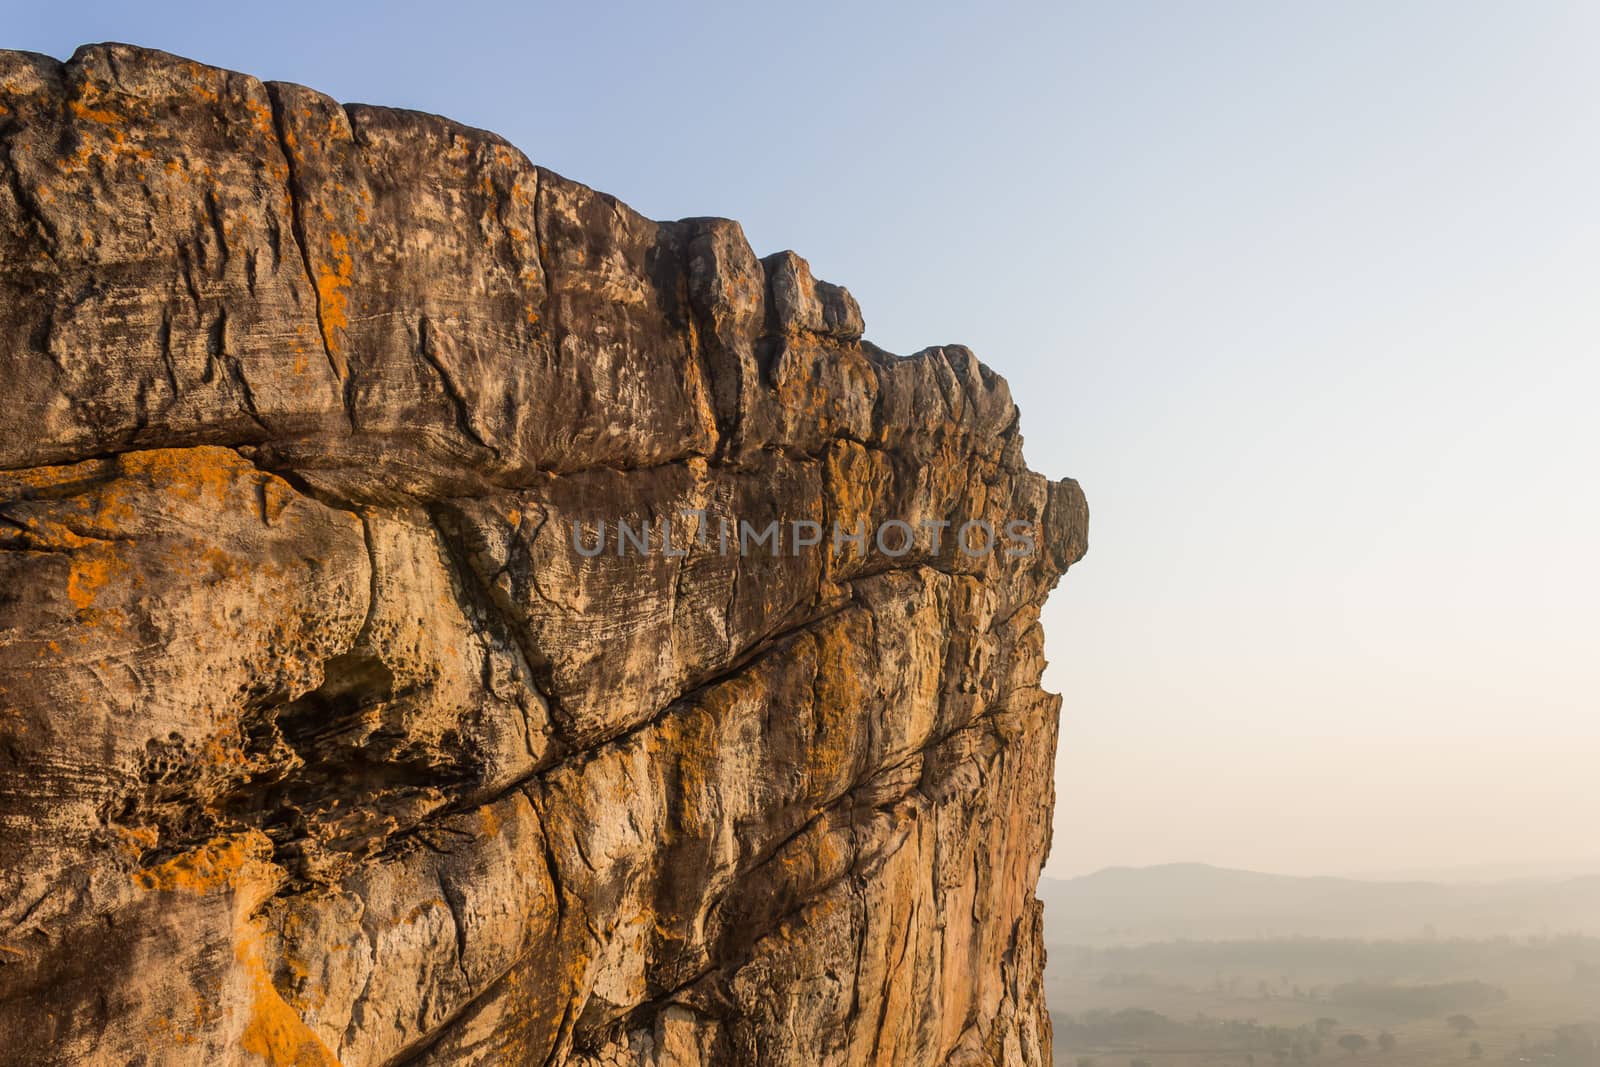 Pha Hua Rue Rock Cliff Mountain Hill Phayao Attractions Thailand with Warm Sun Light and Green Tree Landscape Side Zoom. Natural stone or rock mountain hill at Phayao northern Thailand travel